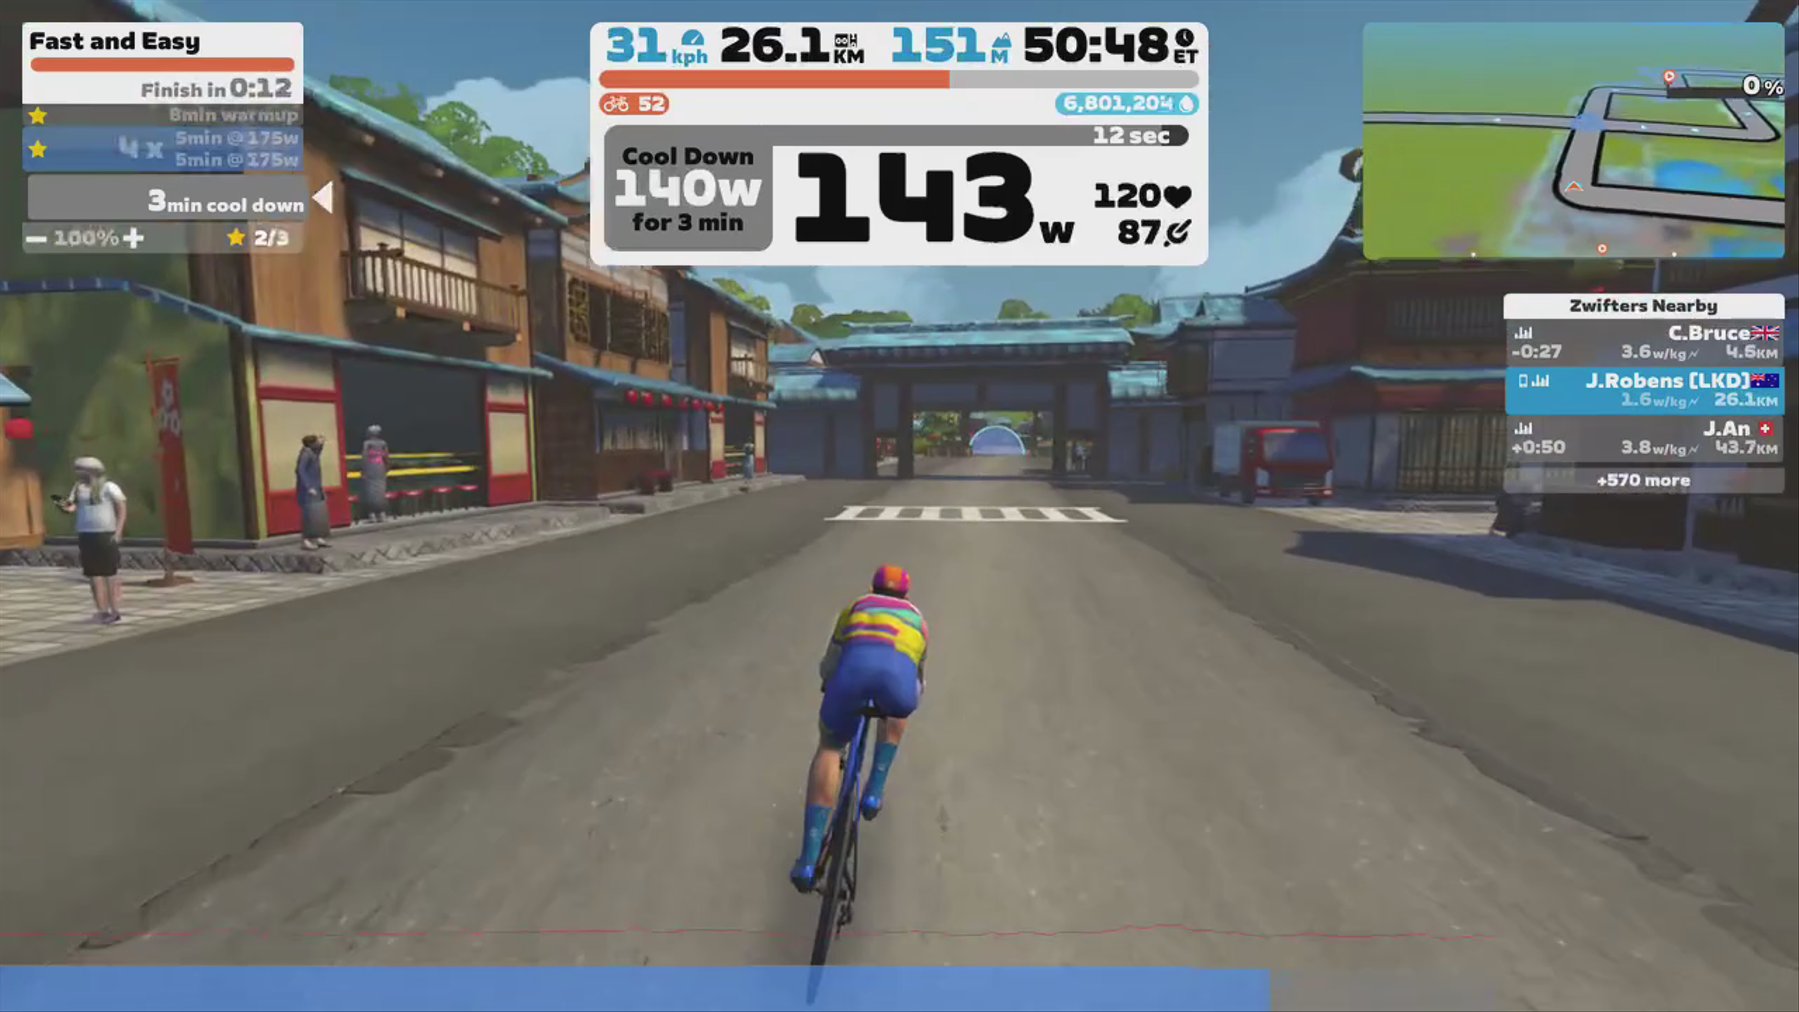 Zwift - Fast and Easy in Makuri Islands